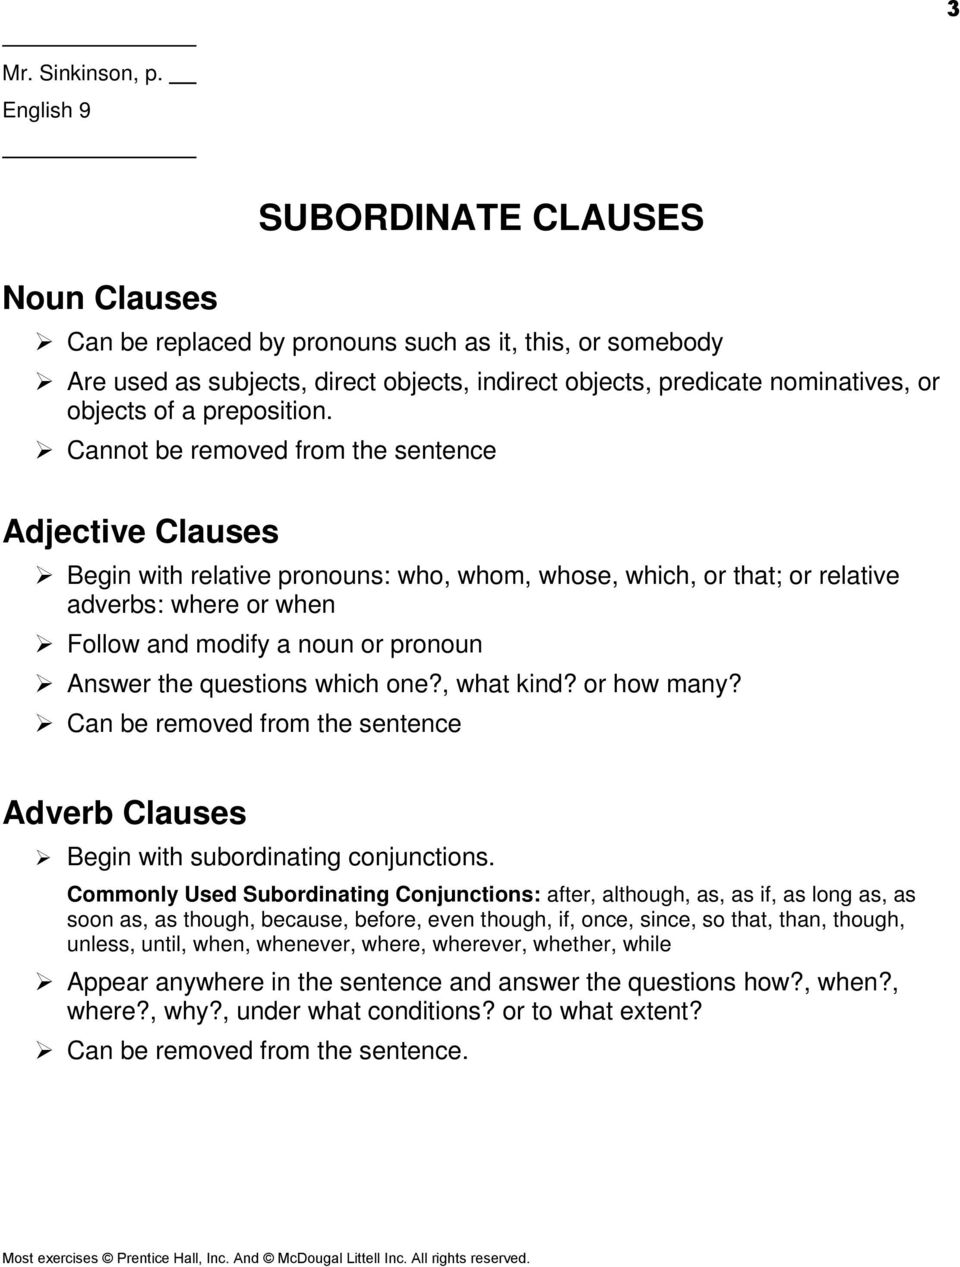 Adjective Adverb And Noun Clauses Pdf Free Download